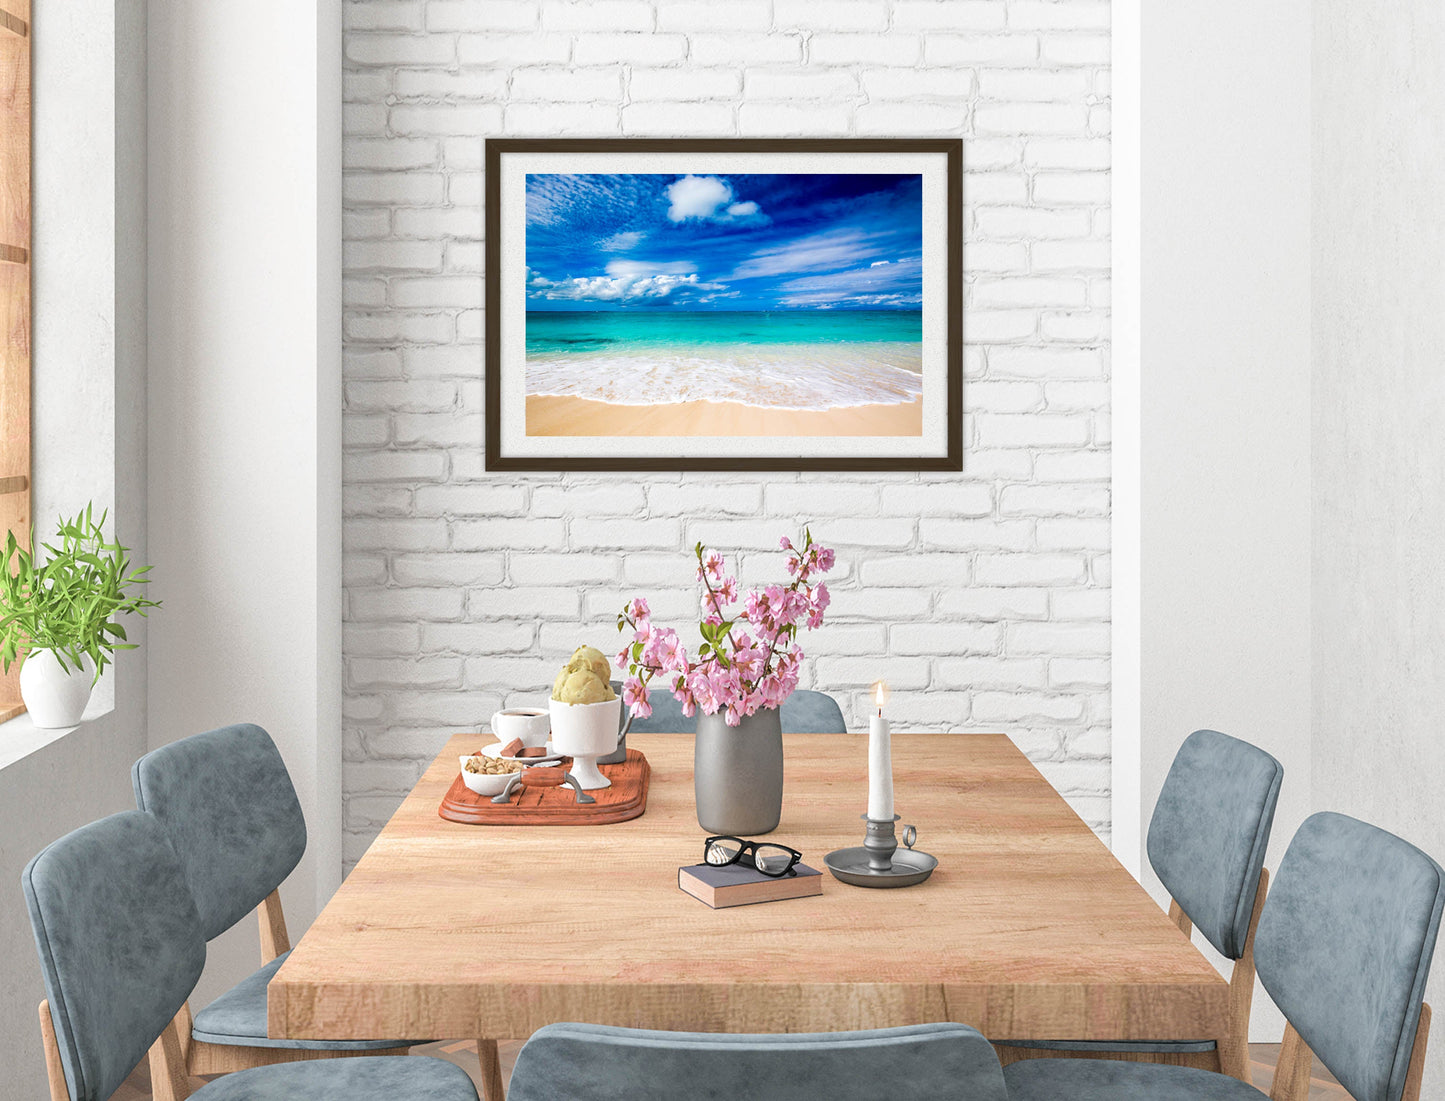 White Sand Beach - Evening on the Pond - Framed Photo - Black on Dining Room Room Wall